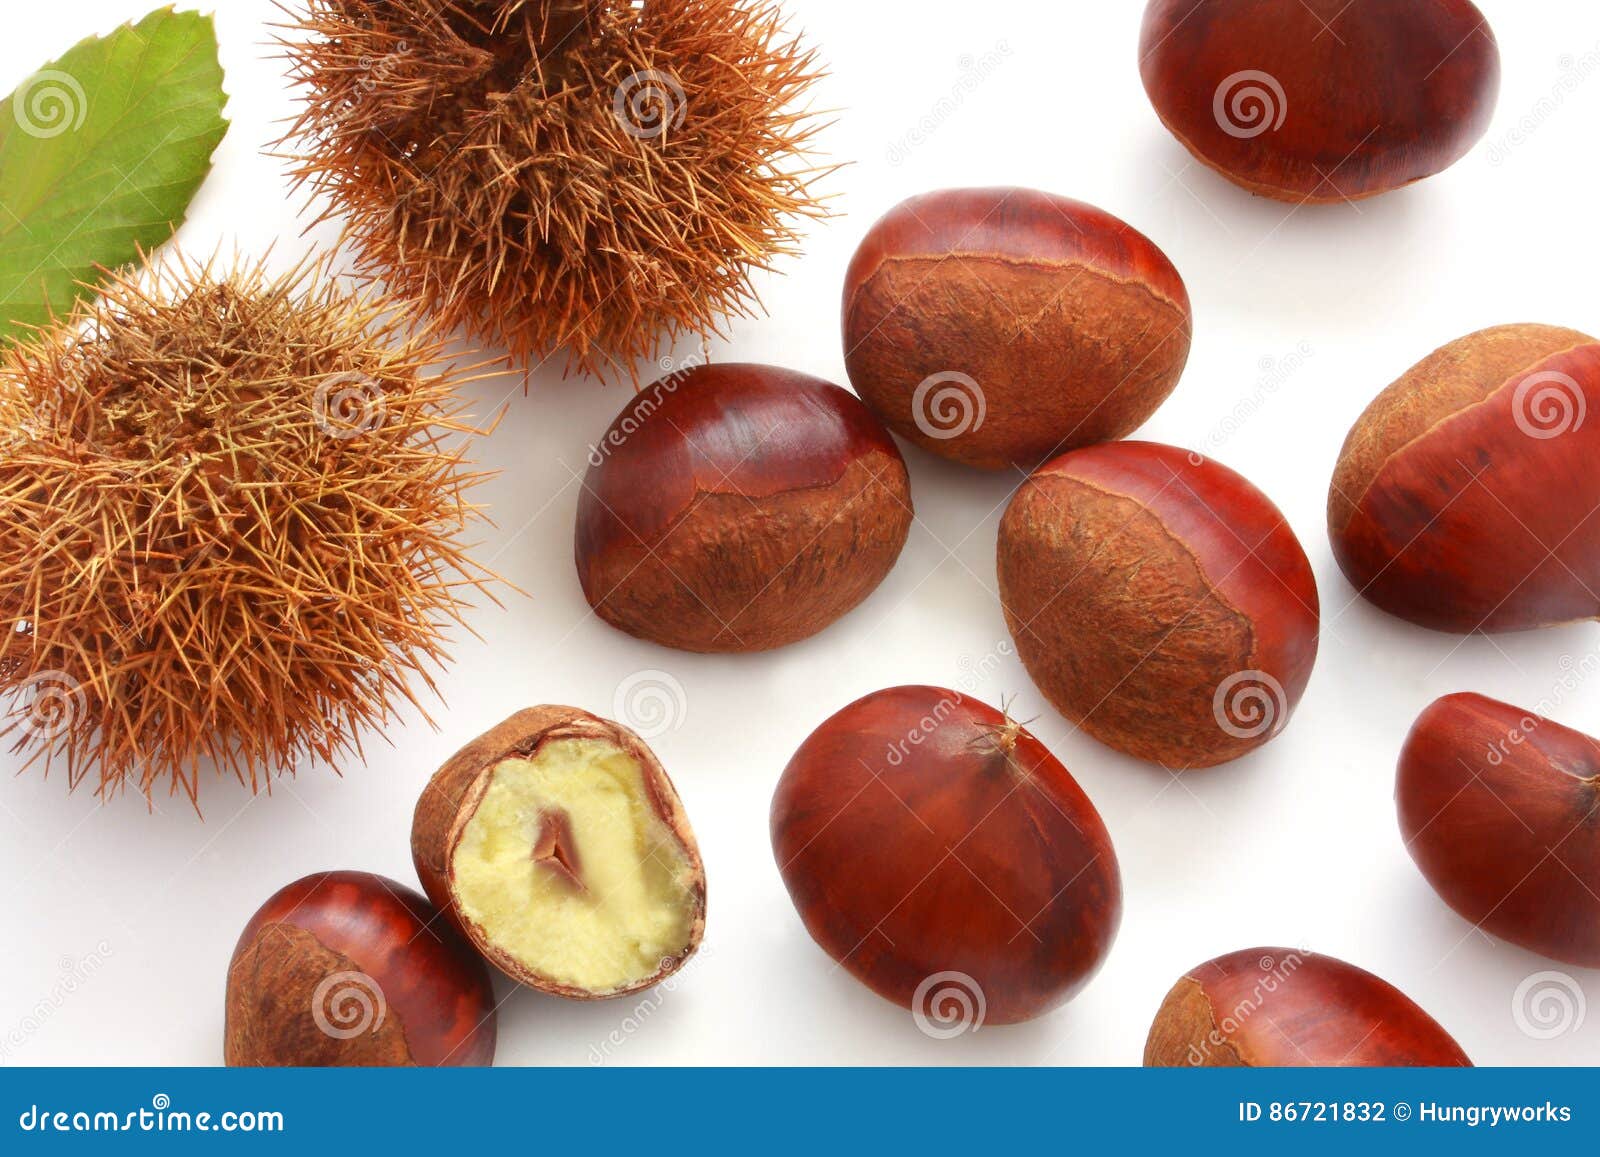 chestnut in its burr and leaf